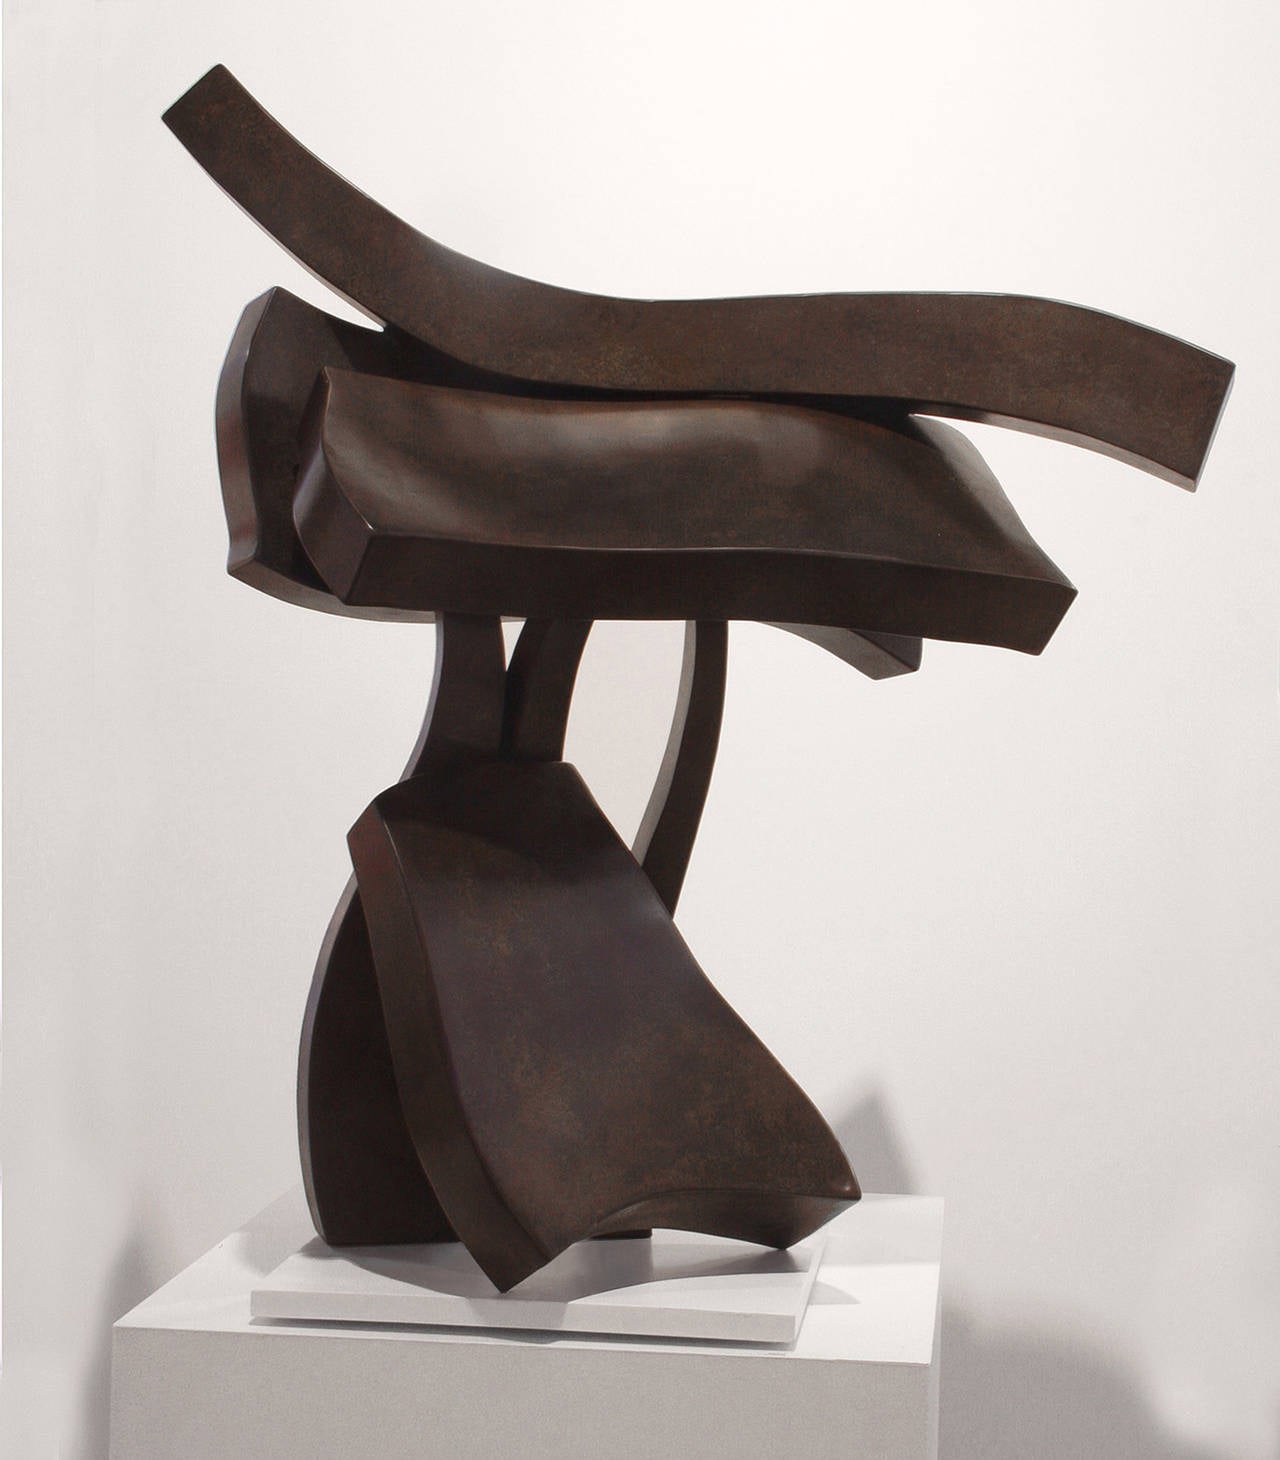 This pedestal bronze sculpture with a medium dark patina appears to be dancing -although it is abstract. Hans Van de Bovenkamp's work is inspired by myths, the collective consciousness, and subliminal learning. “I like dreams, myths and mythology,"